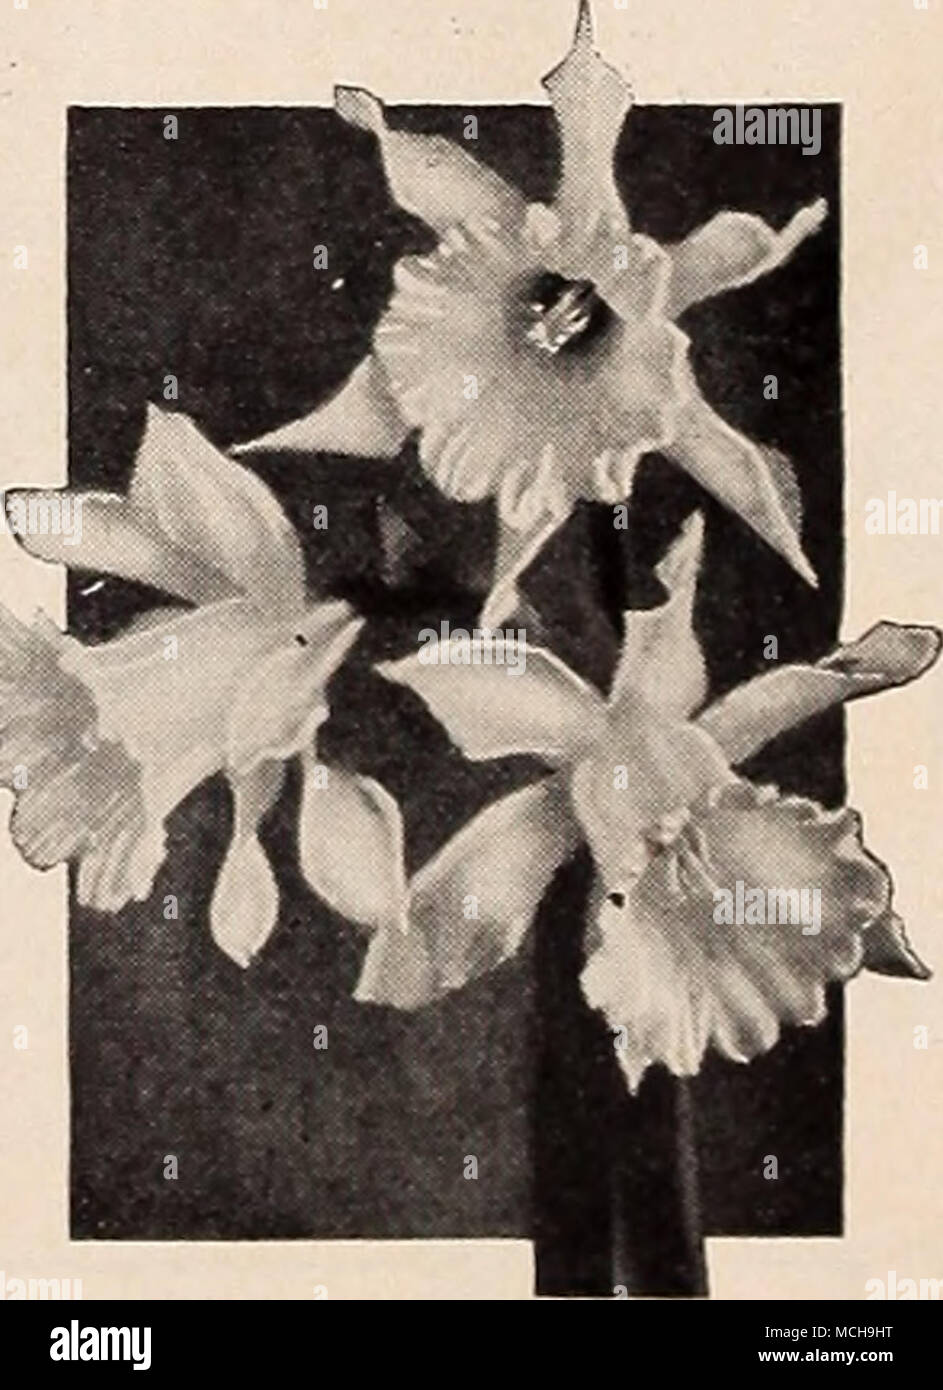 . Narcissus, W. P. Milner 40-803 W. P. Milner. A minia- ture trumpet variety with grace- ful sulphur white blooms on stems 10 inches tall. Easily established and long-lived. Has the fragrance of Cowslip. 12 for S2.25; 25 for S4.00. 3 for 65c Dainty Dwarf Daffodils for the Rock Garden a These lovely Narcissus are particu- larly suited to planting in the rock gar- den. Placed in groups of six or more bulbs, they add a charming effect to the spring display in the rockerj'. In addi- tion to the varieties described below all of the Jonquils but particularly the Single Sweet-Scented variety are exce Stock Photo